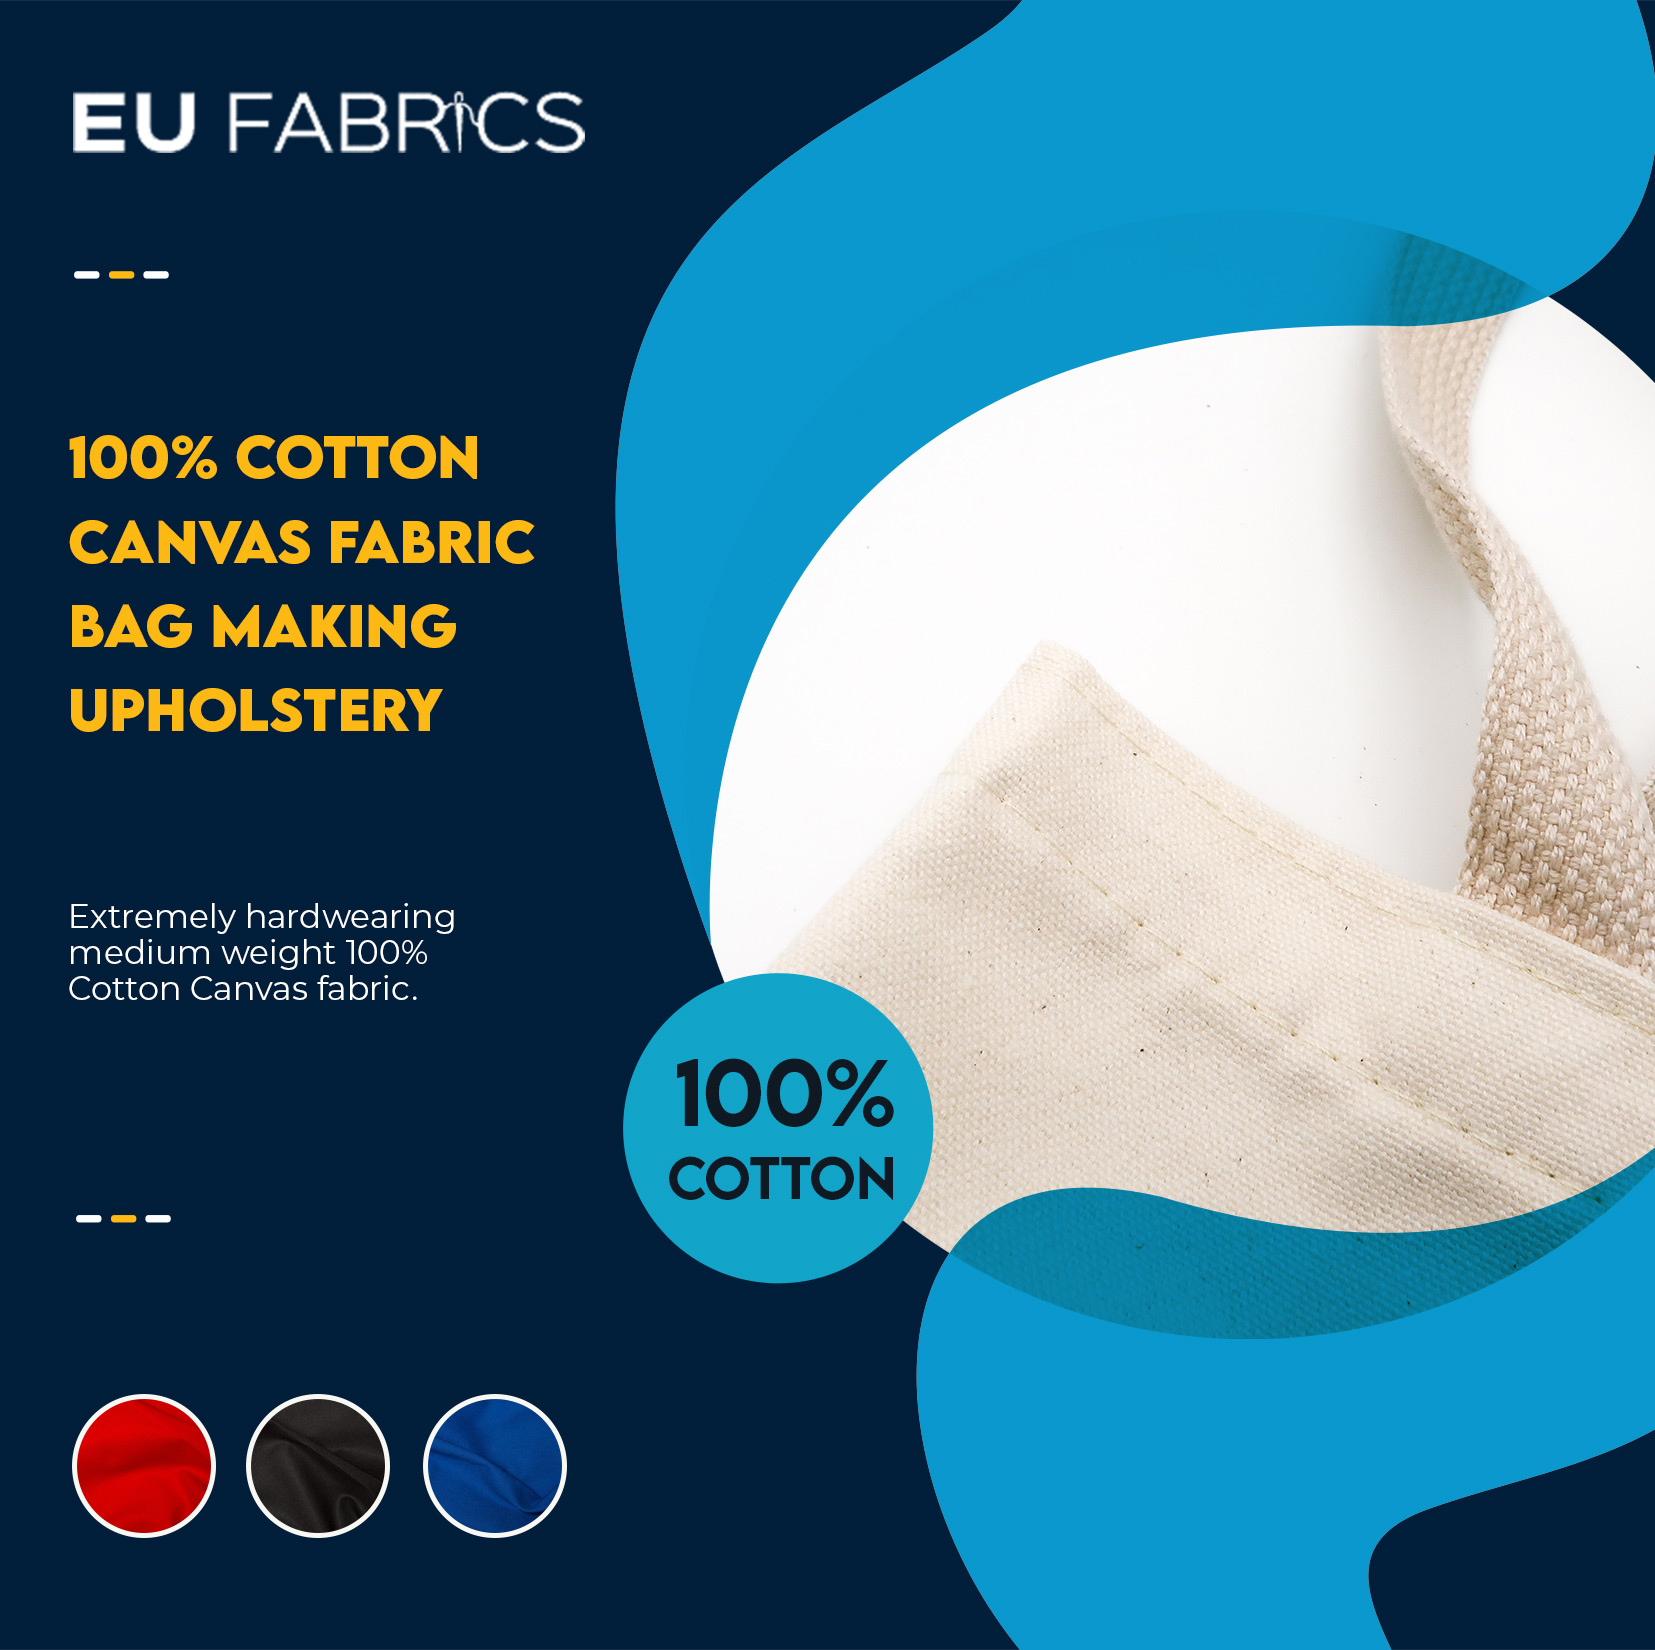 100% Cotton Canvas Fabric Bag Making Upholstery